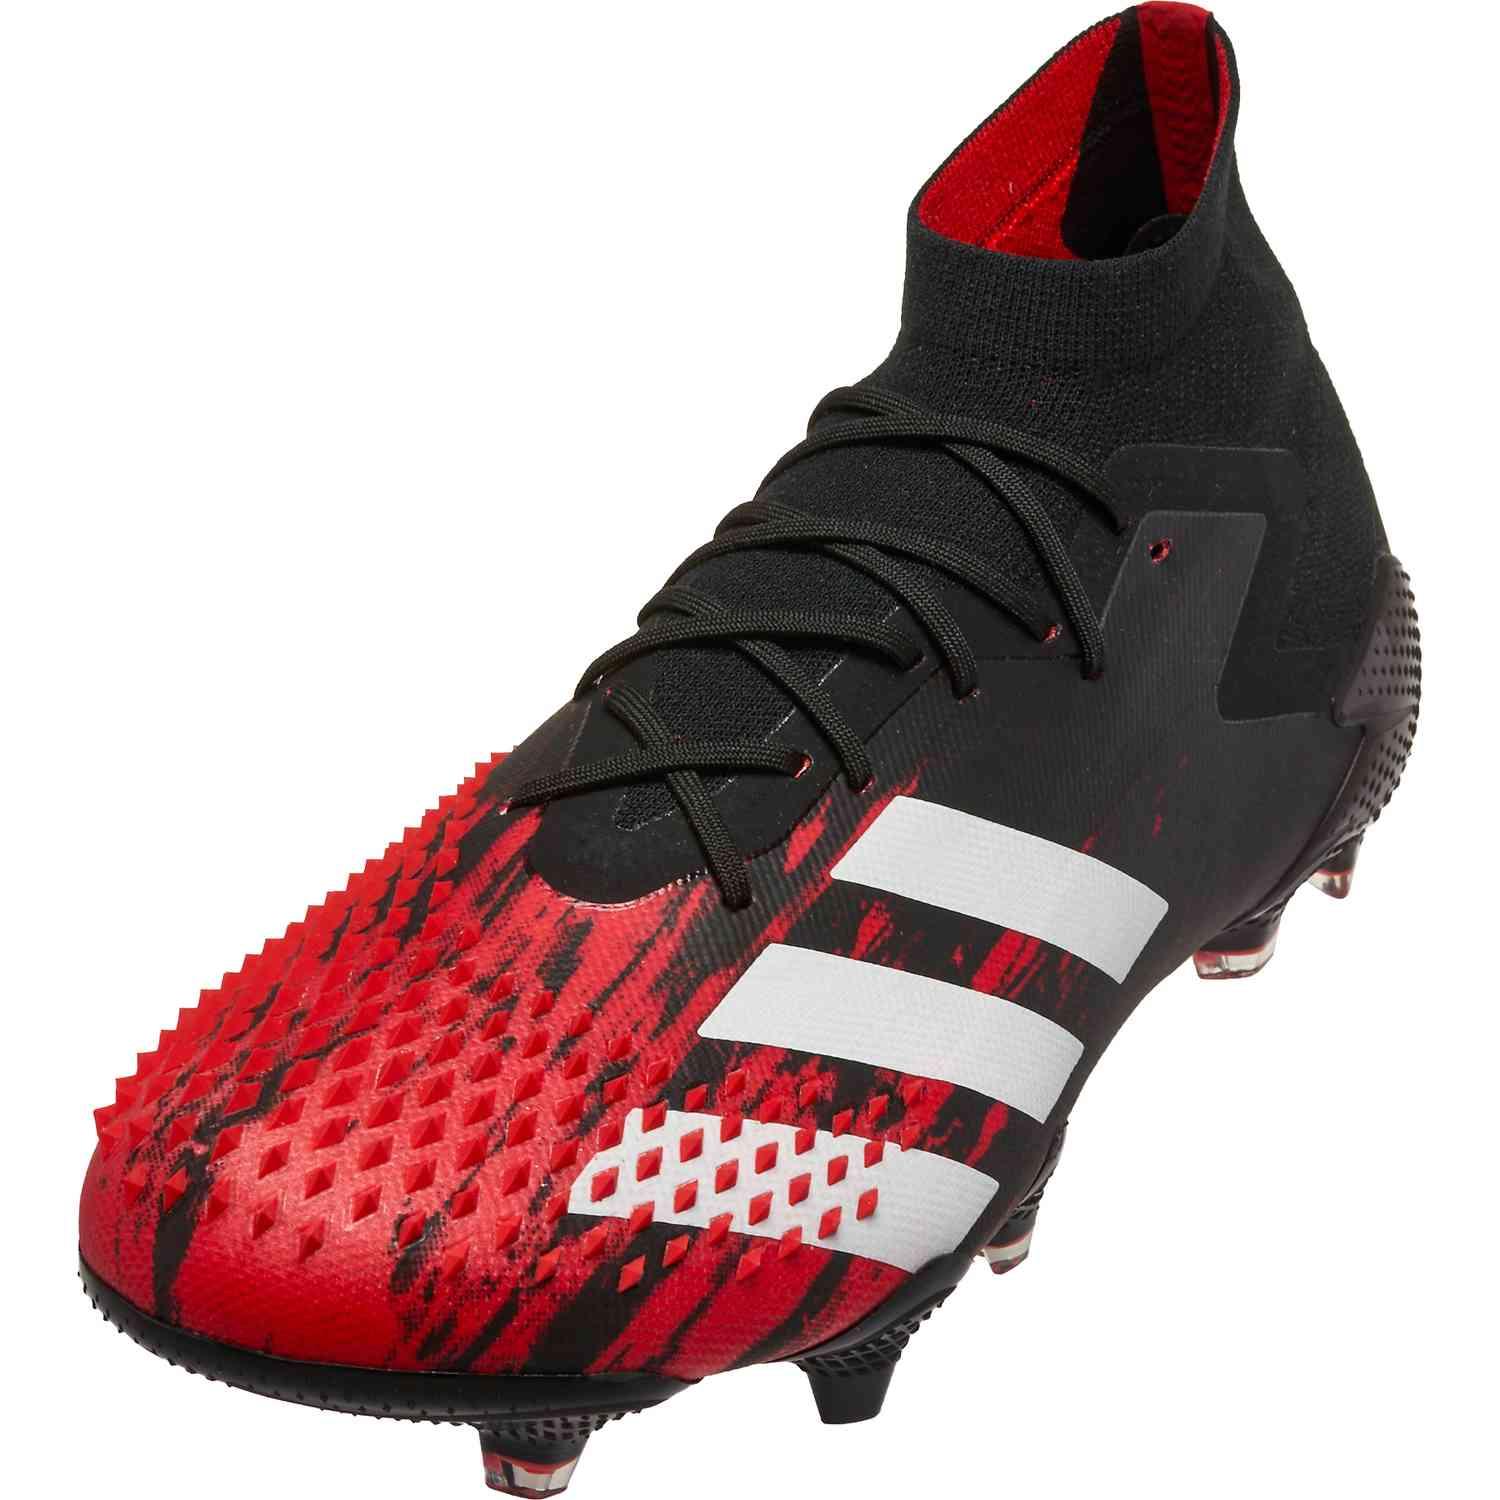 Shop Predator Boots Buy Online adidas south africa